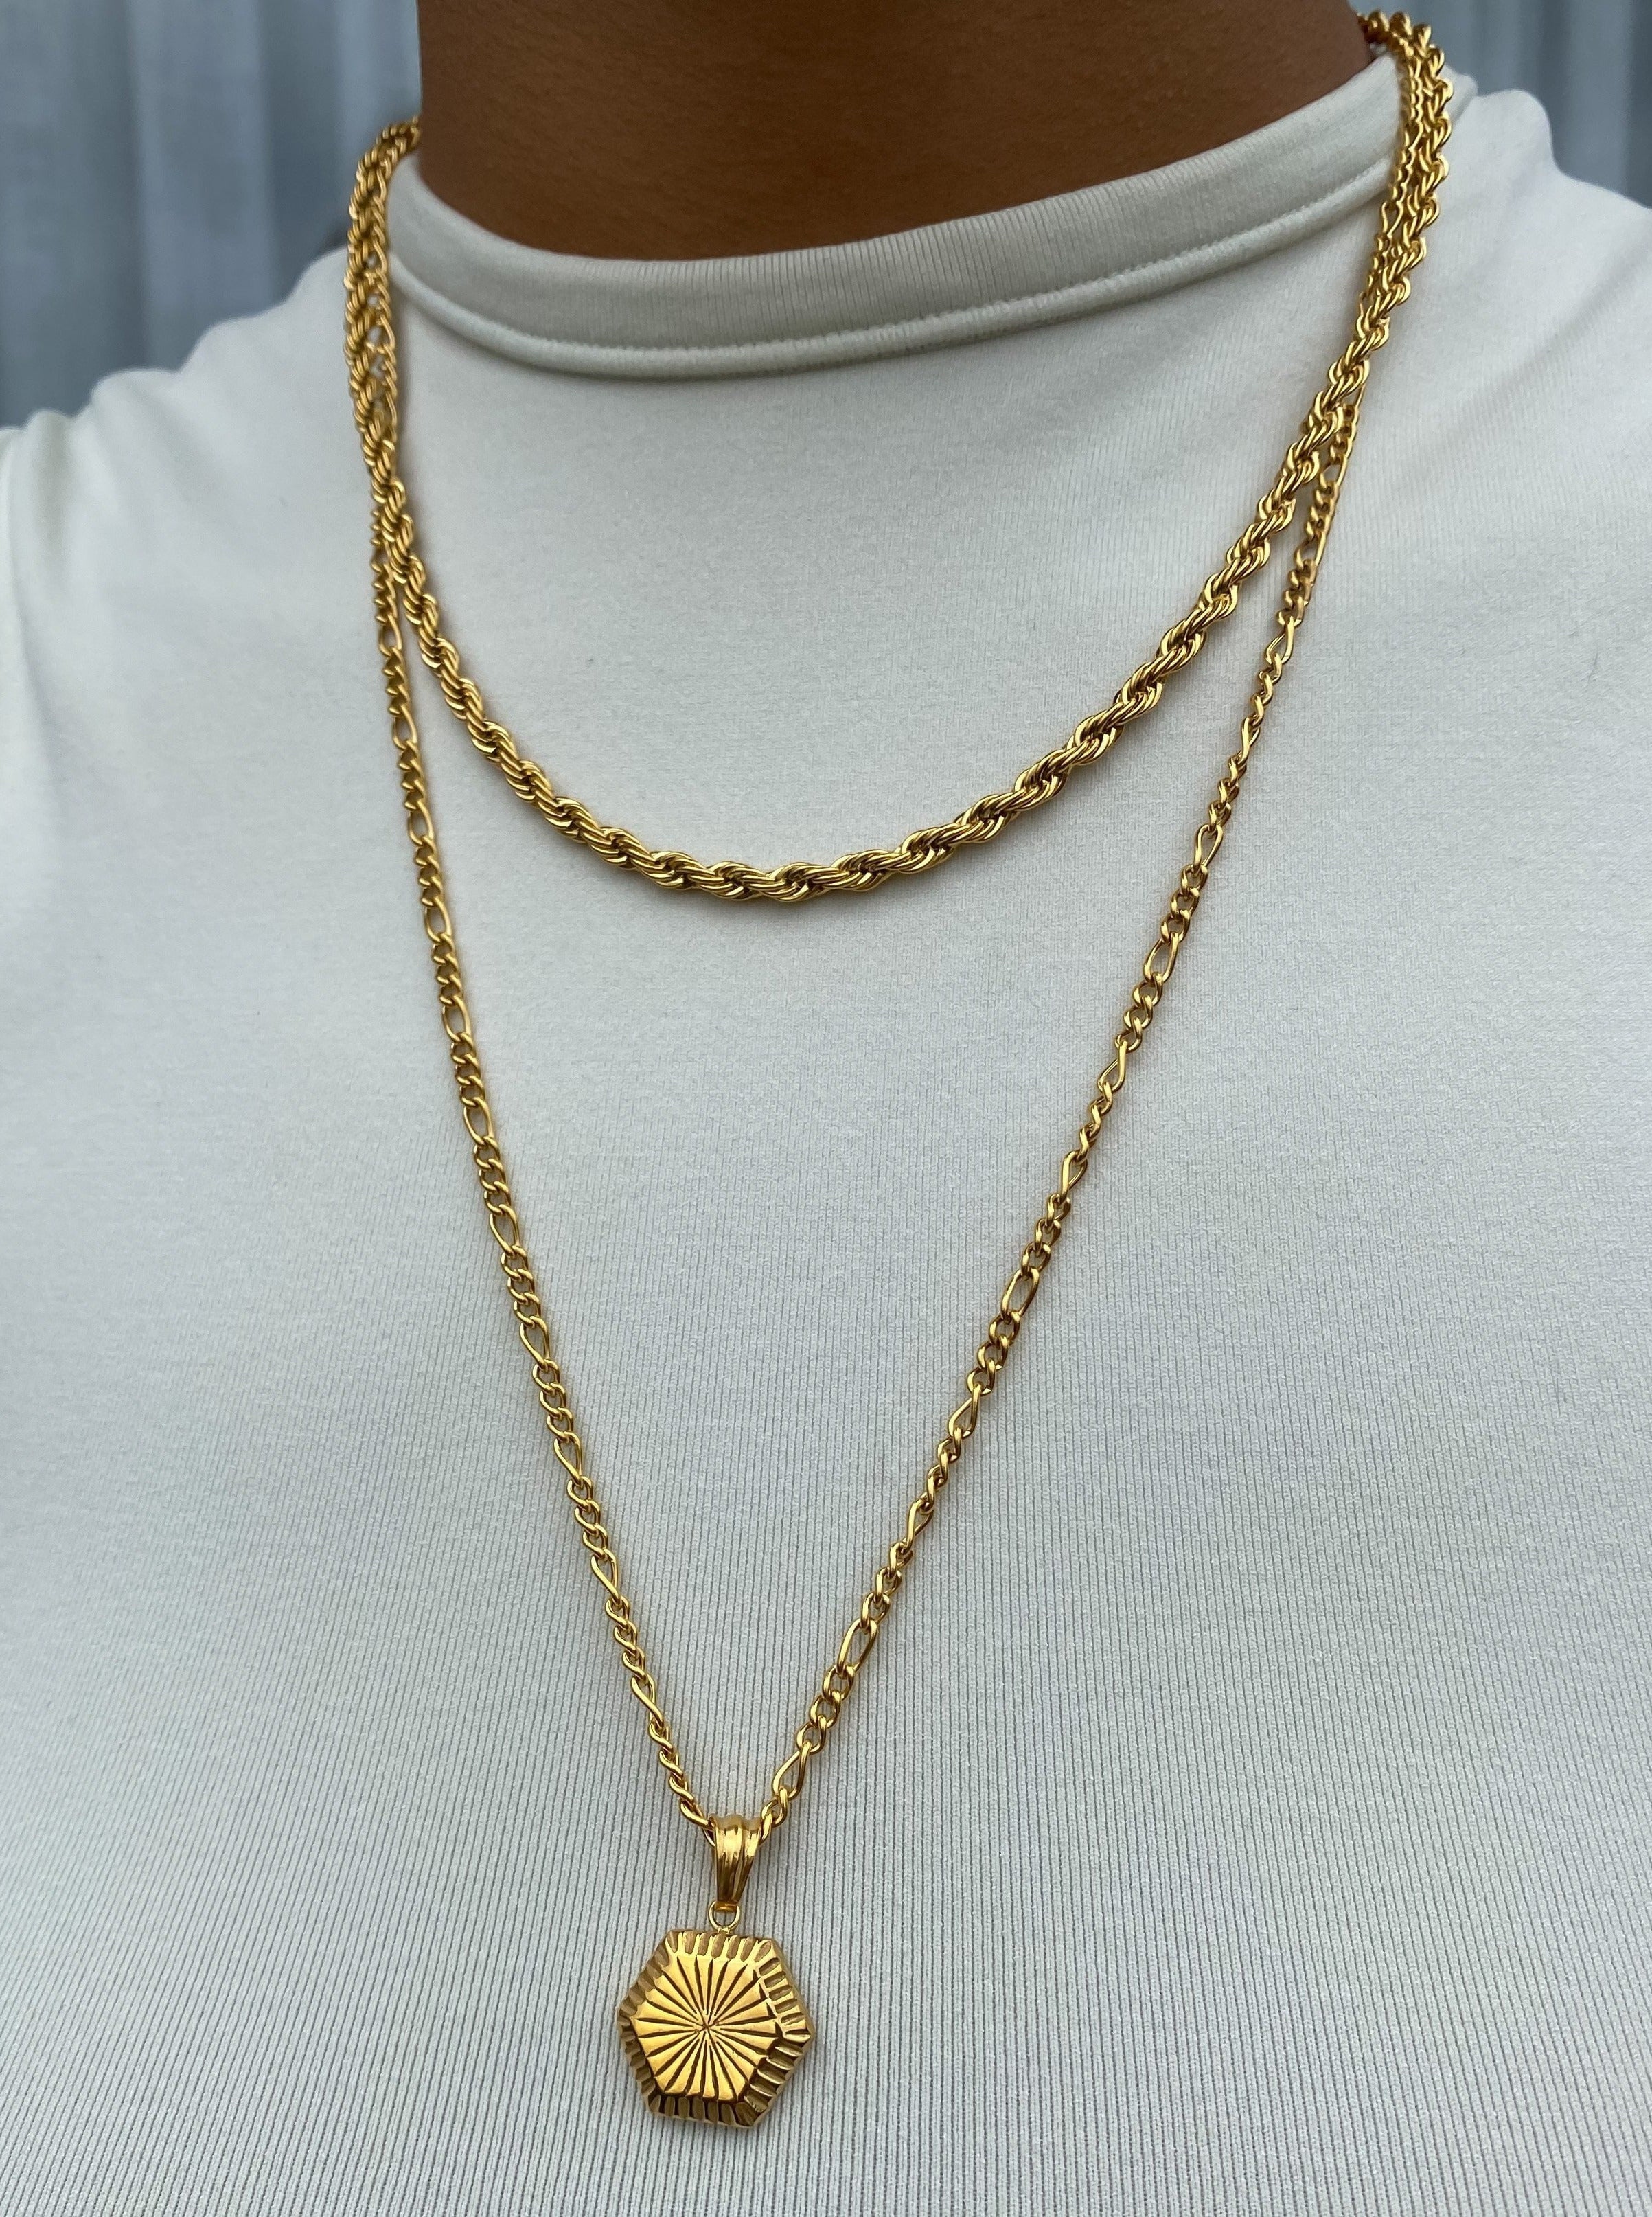 "Don't Be A Dick" Chain